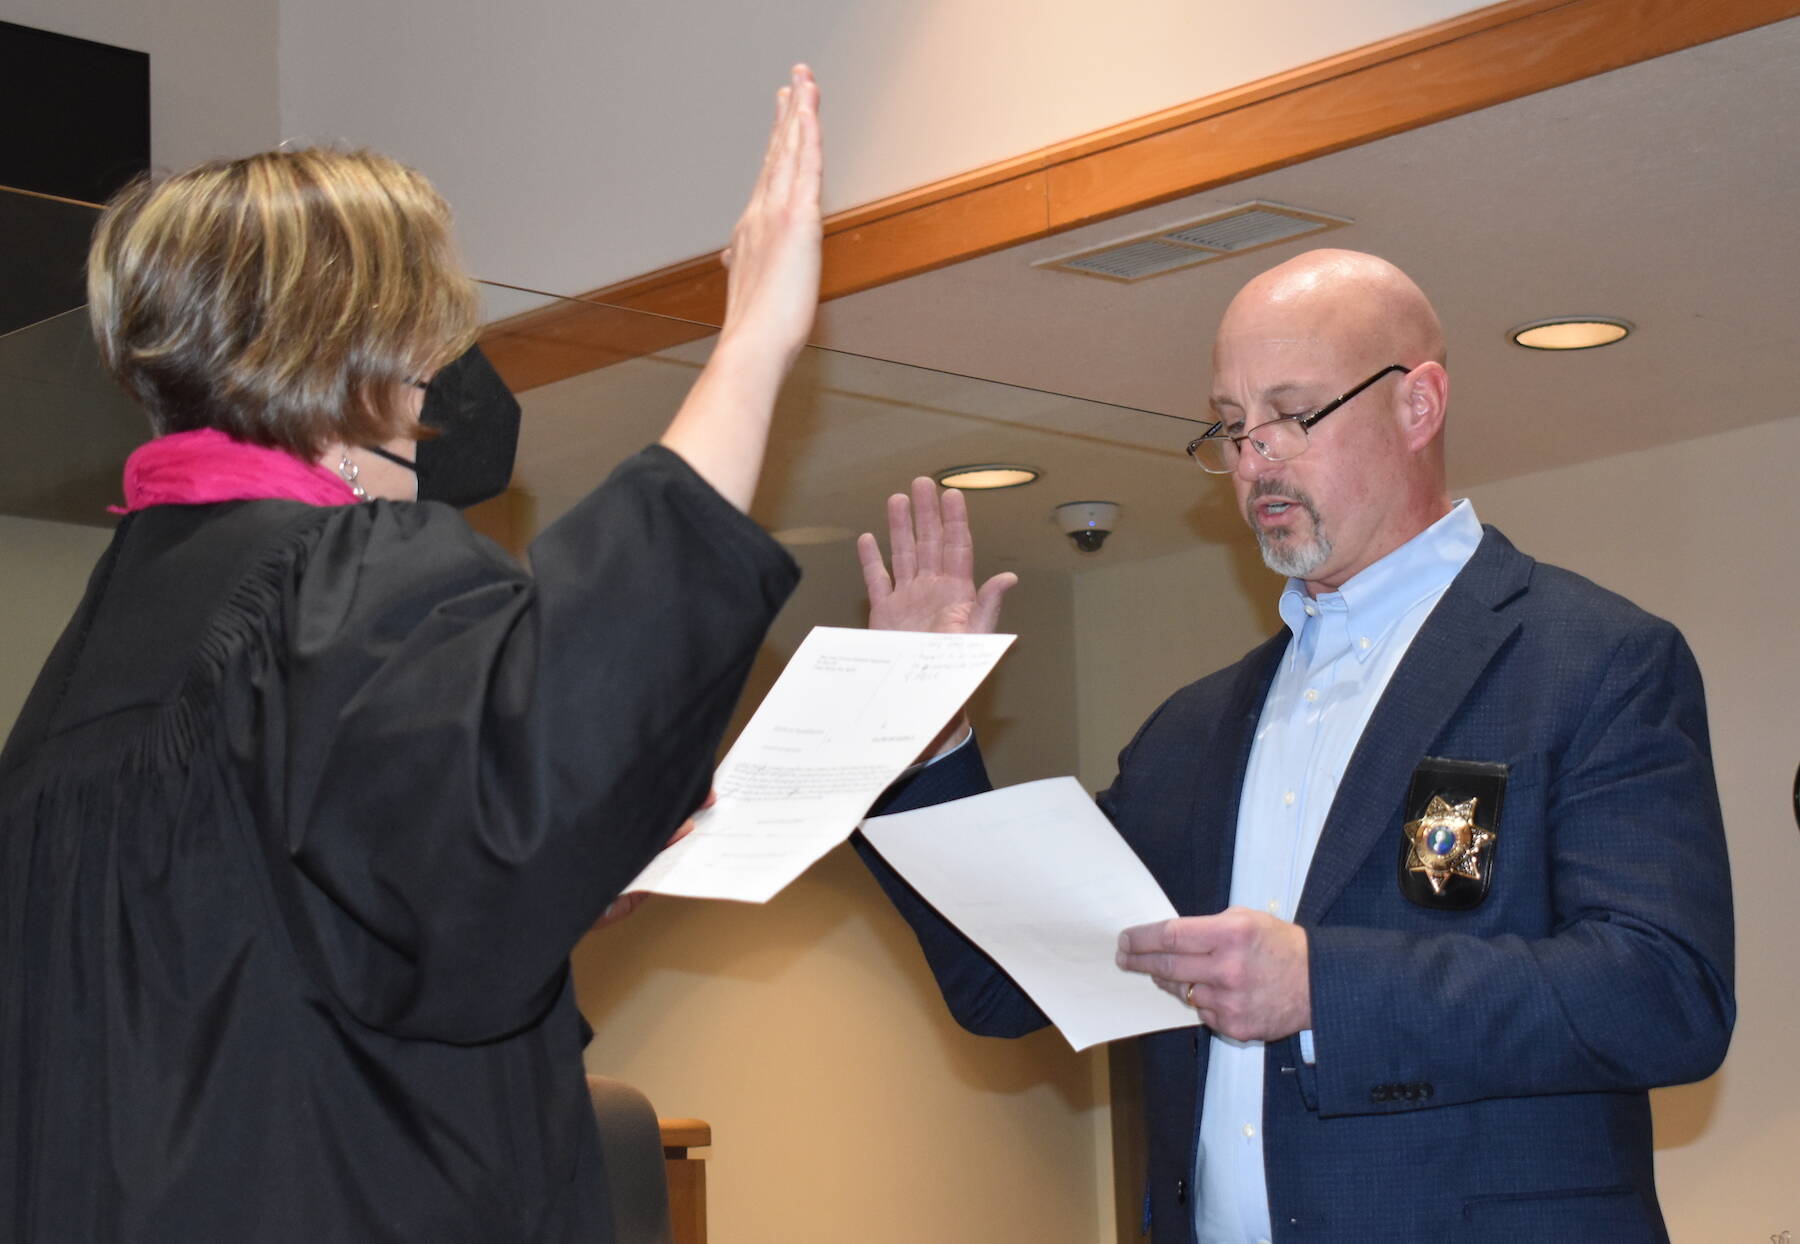 Kelley Balcomb-Bartok Staff photo
Newly Elected Sheriff Eric Peter is sworn in by Superior Court Judge Kathryn “Katie” Loring during an official ceremony Dec. 30 at the Superior Court courtroom.